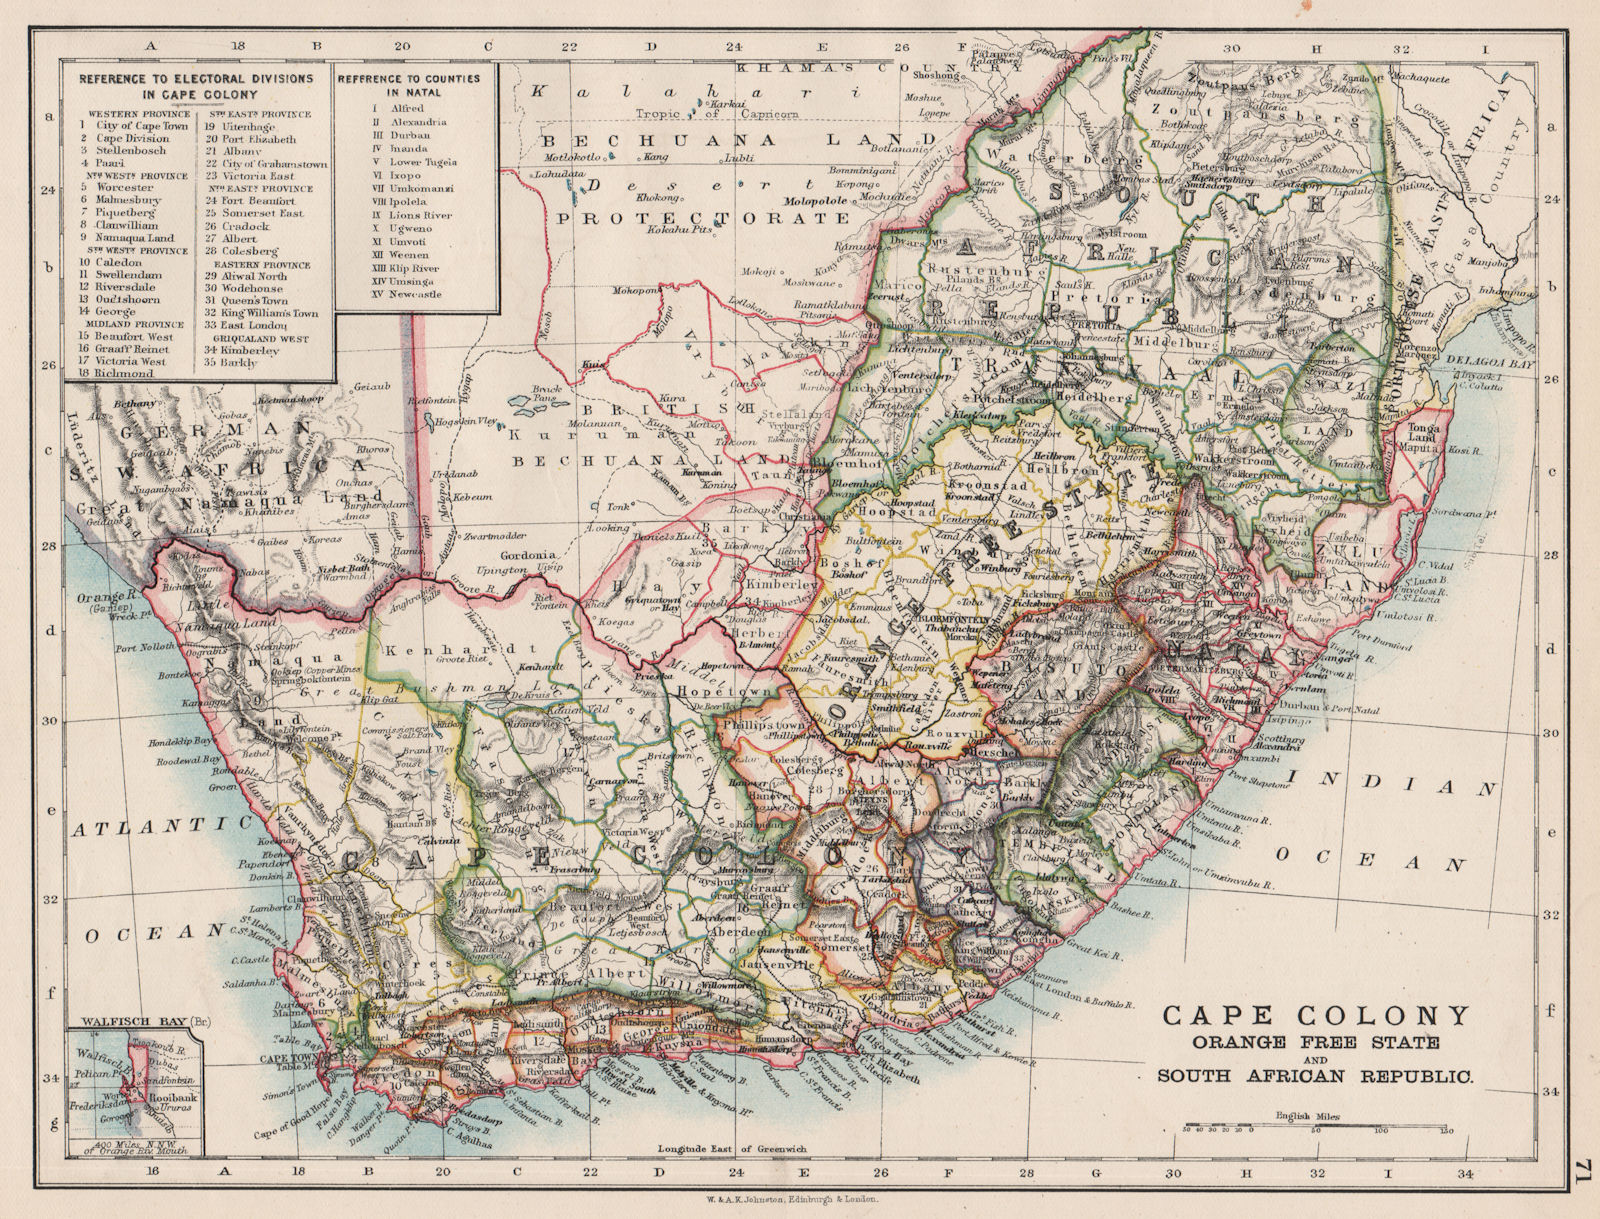 COLONIAL SOUTH AFRICA. Cape Colony. Orange Free State. SA Republic 1897 map